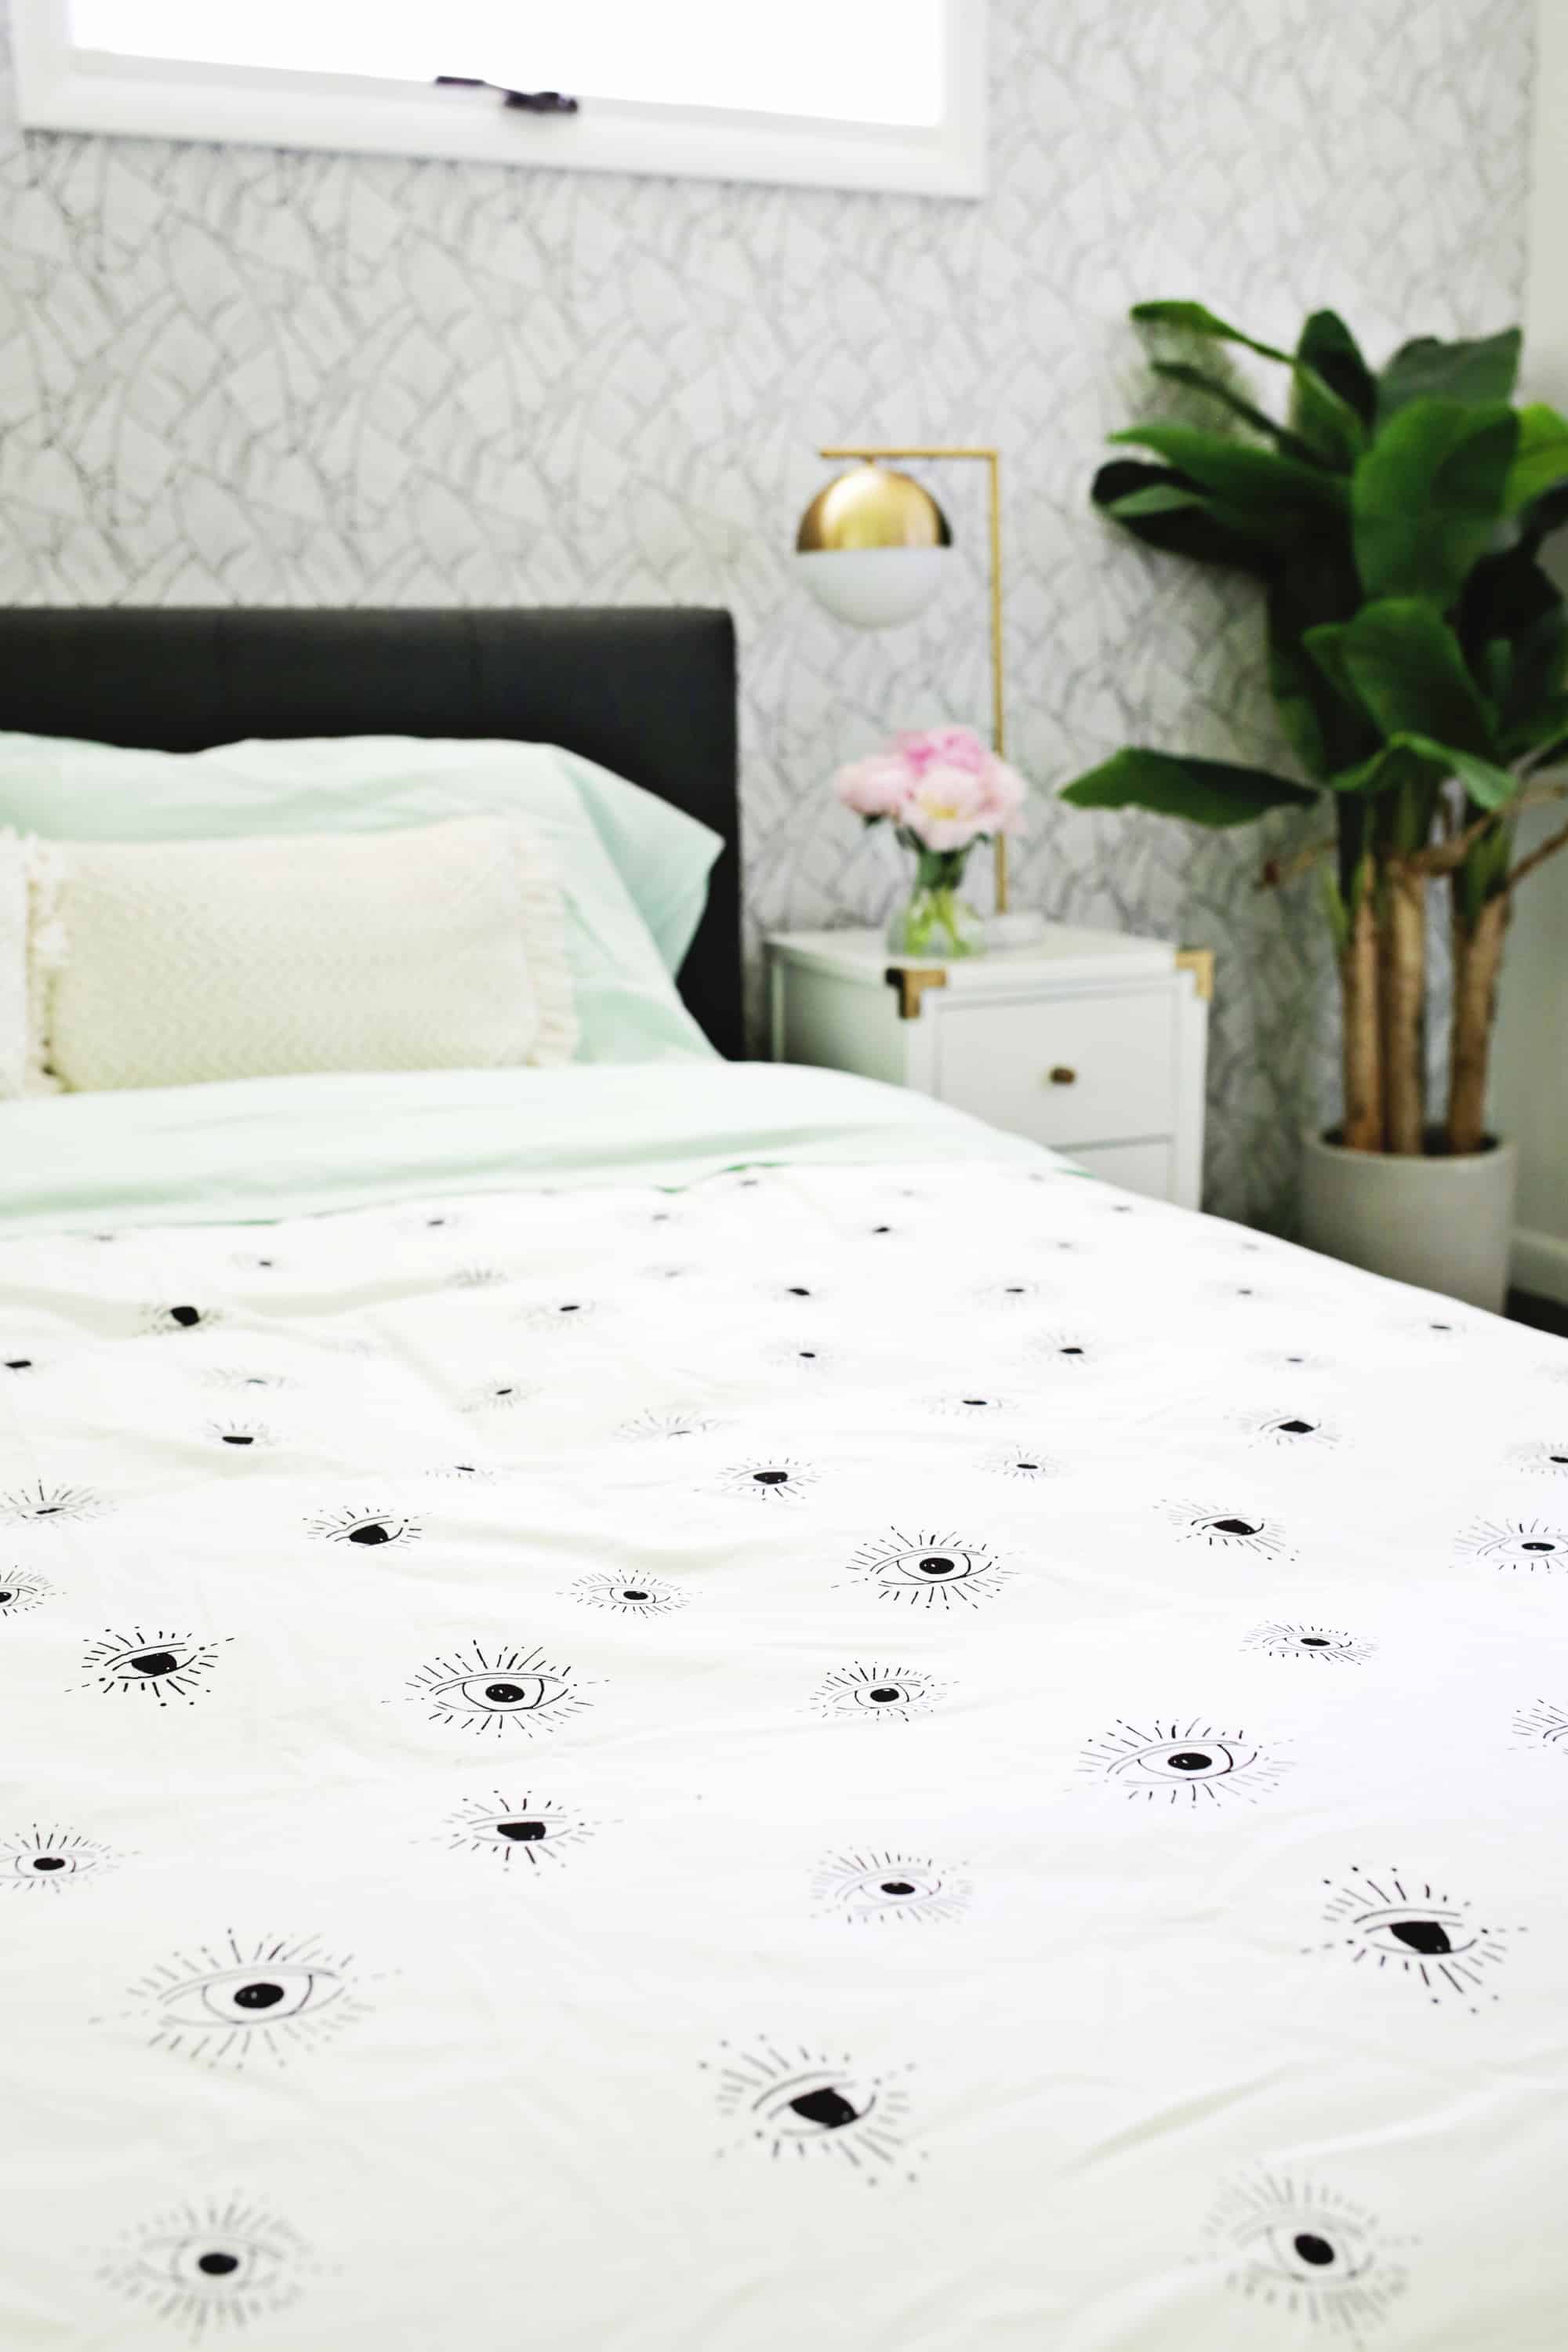 Easy Duvet Cover With Any Flat Sheet, How To Make A Duvet Cover With Two Sheets